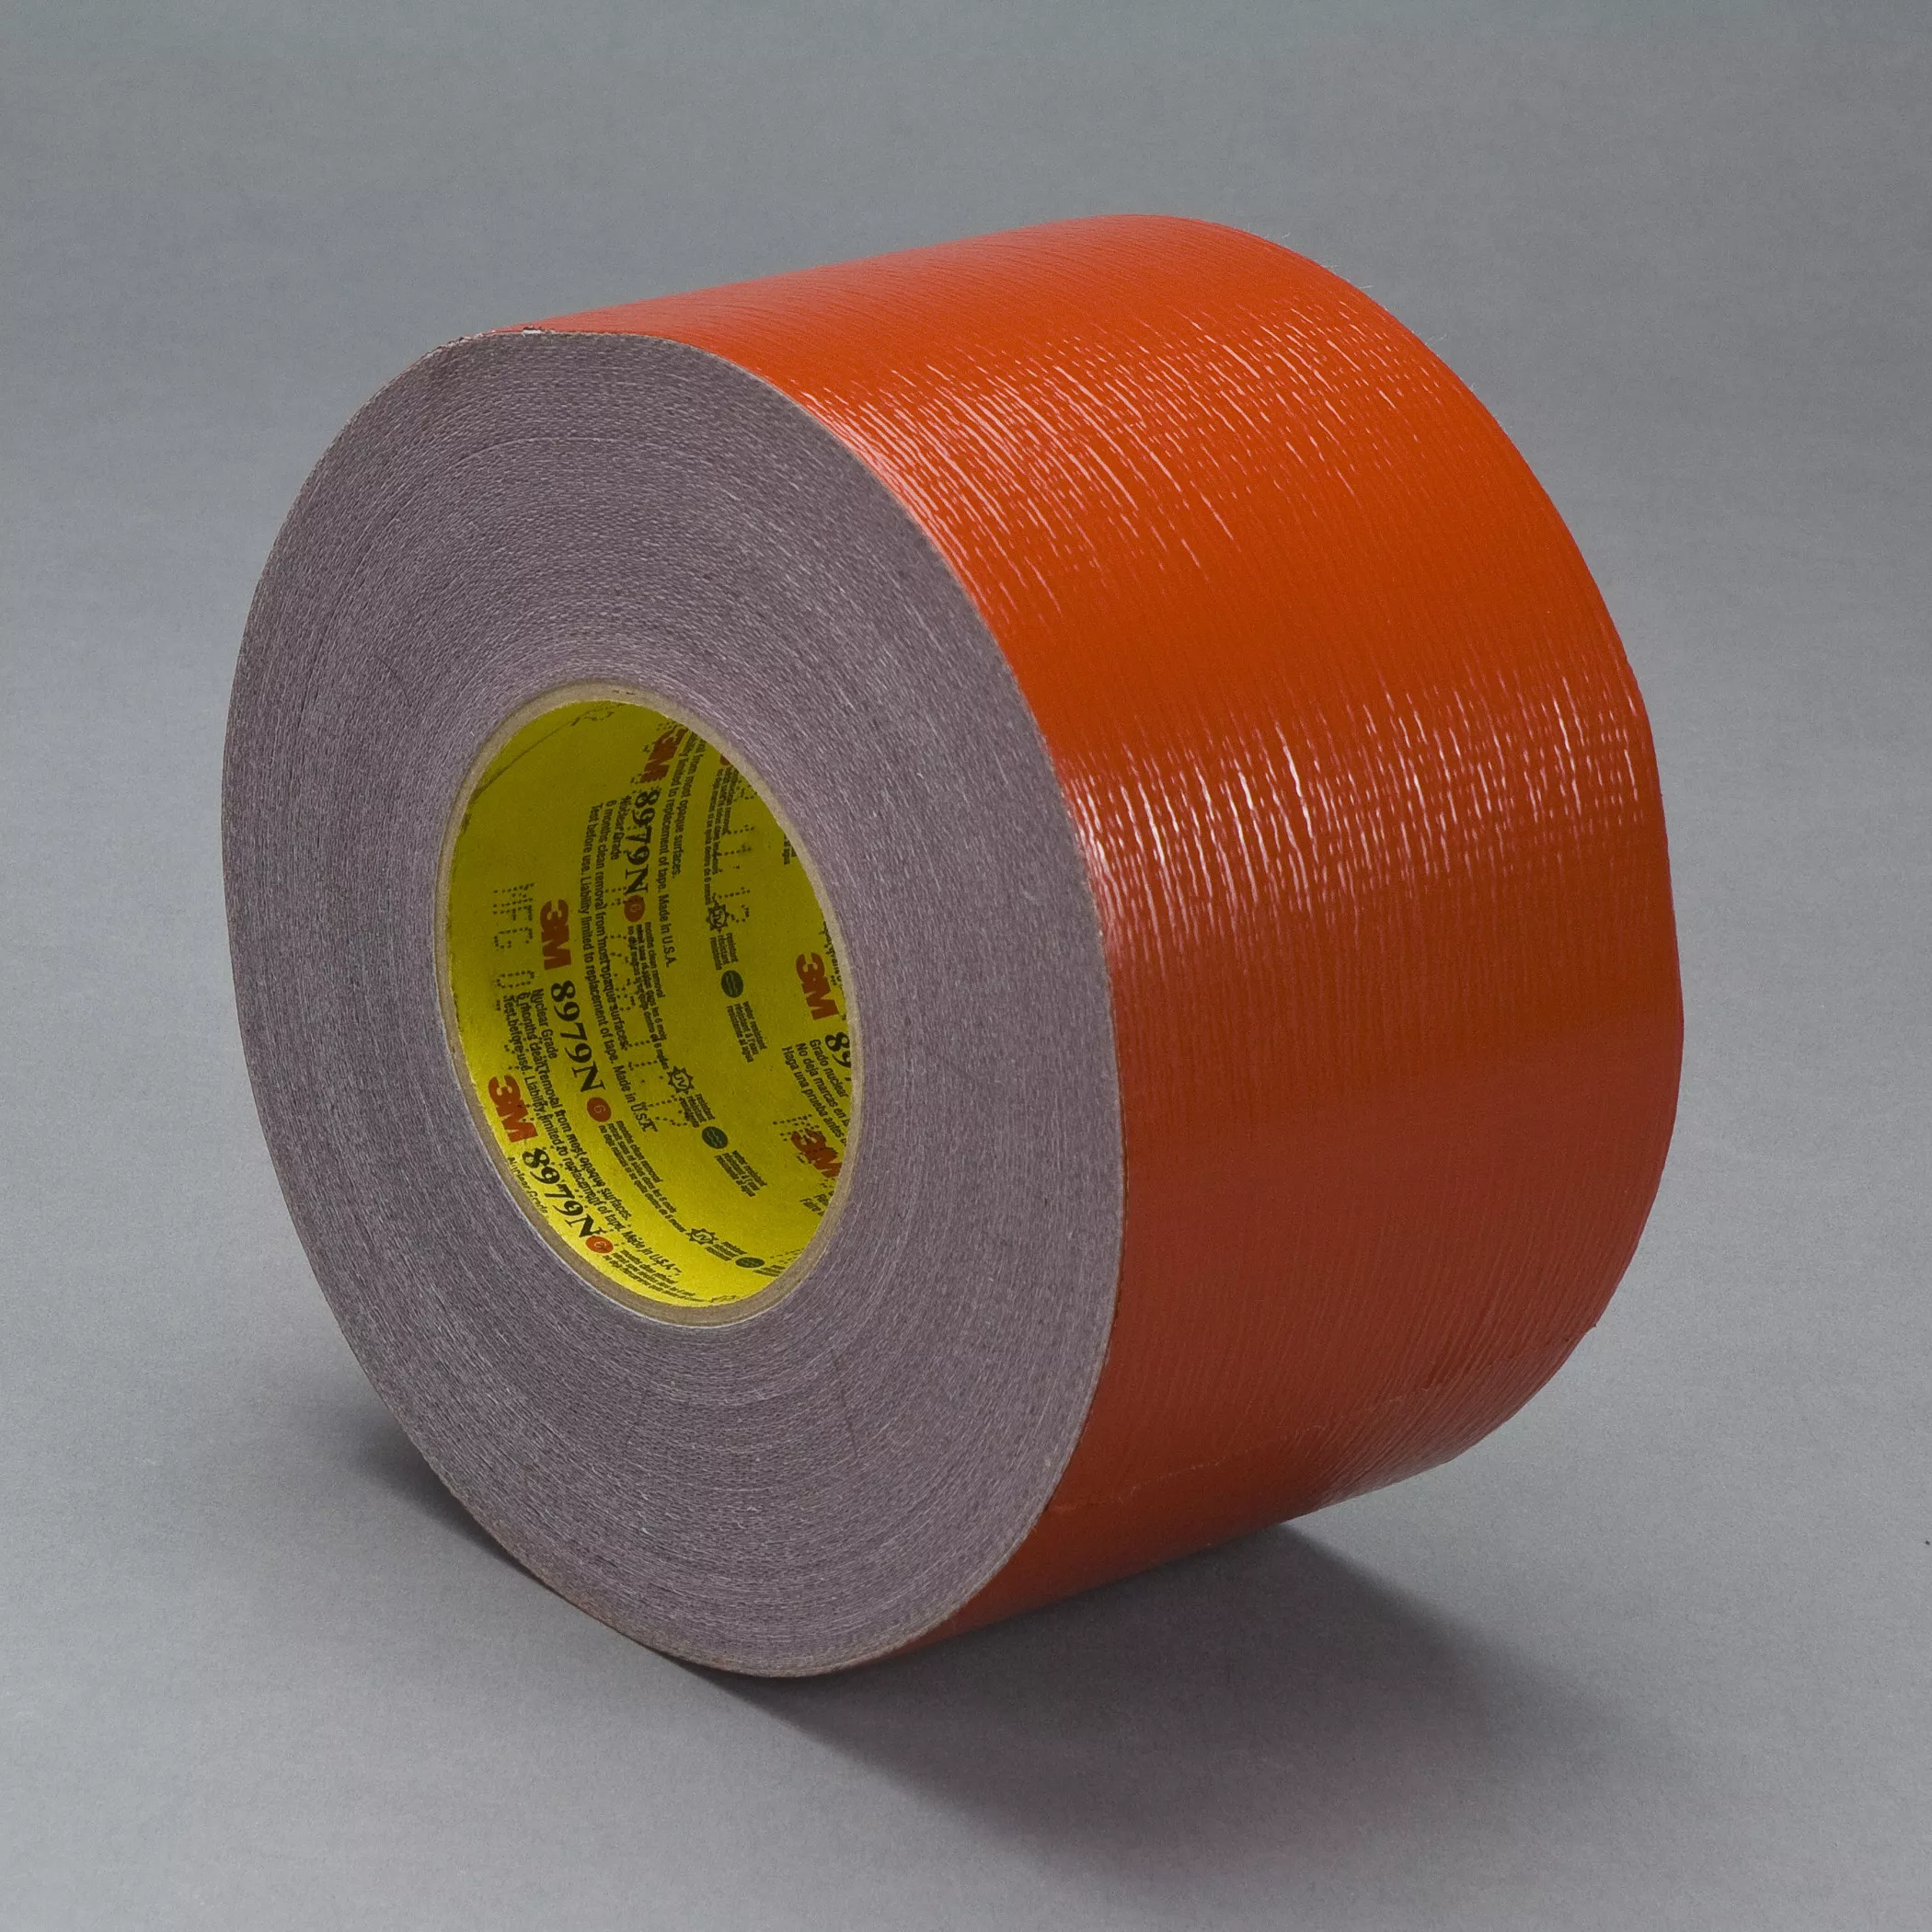 3M™ Performance Plus Duct Tape 8979N, Red, 48 mm x 54.8 m, 12.1 mil,
24/Case